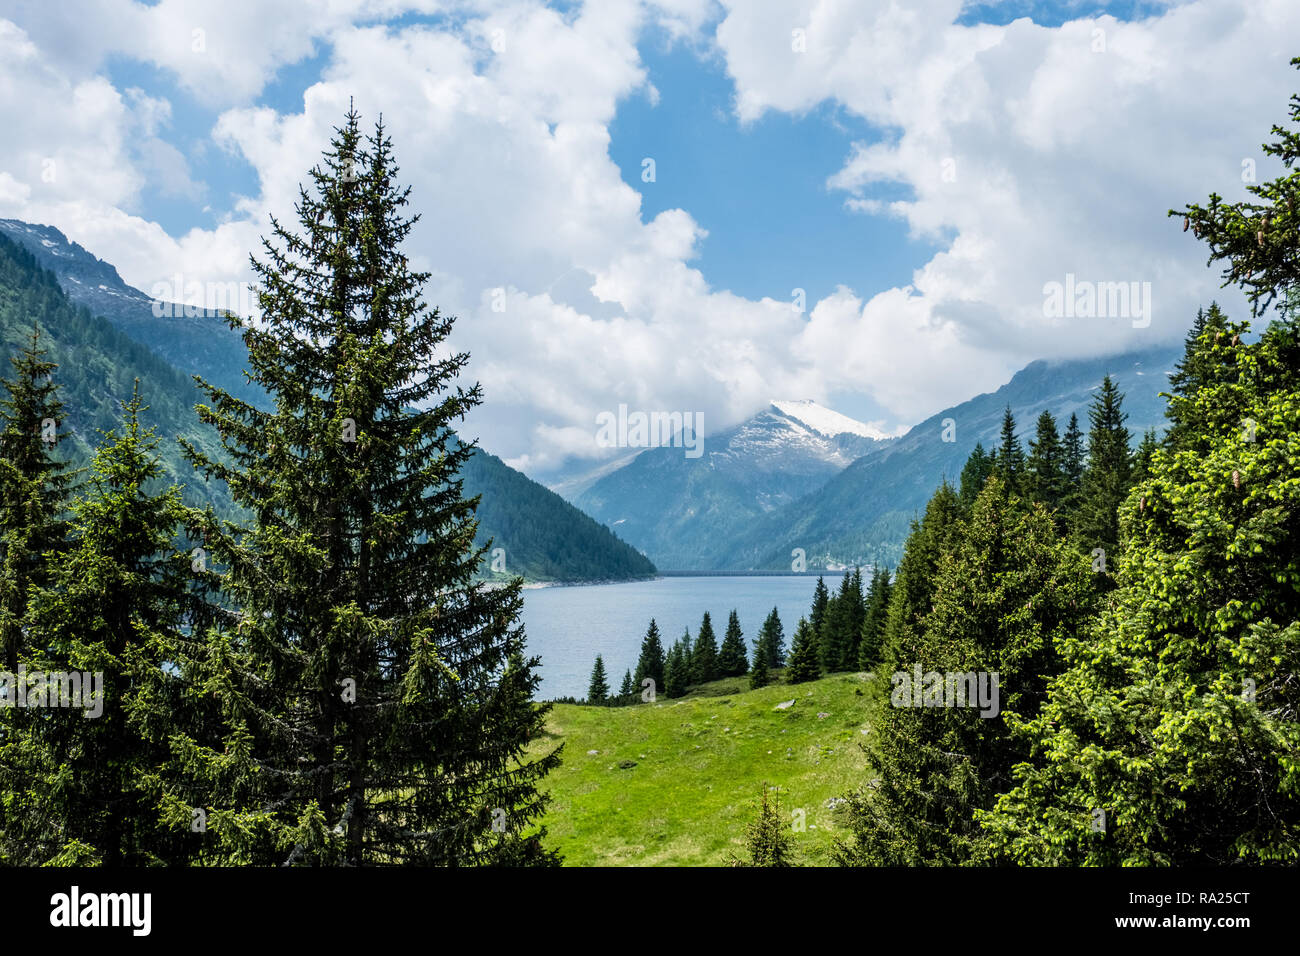 view of lake behind tress in val di fumo Stock Photo